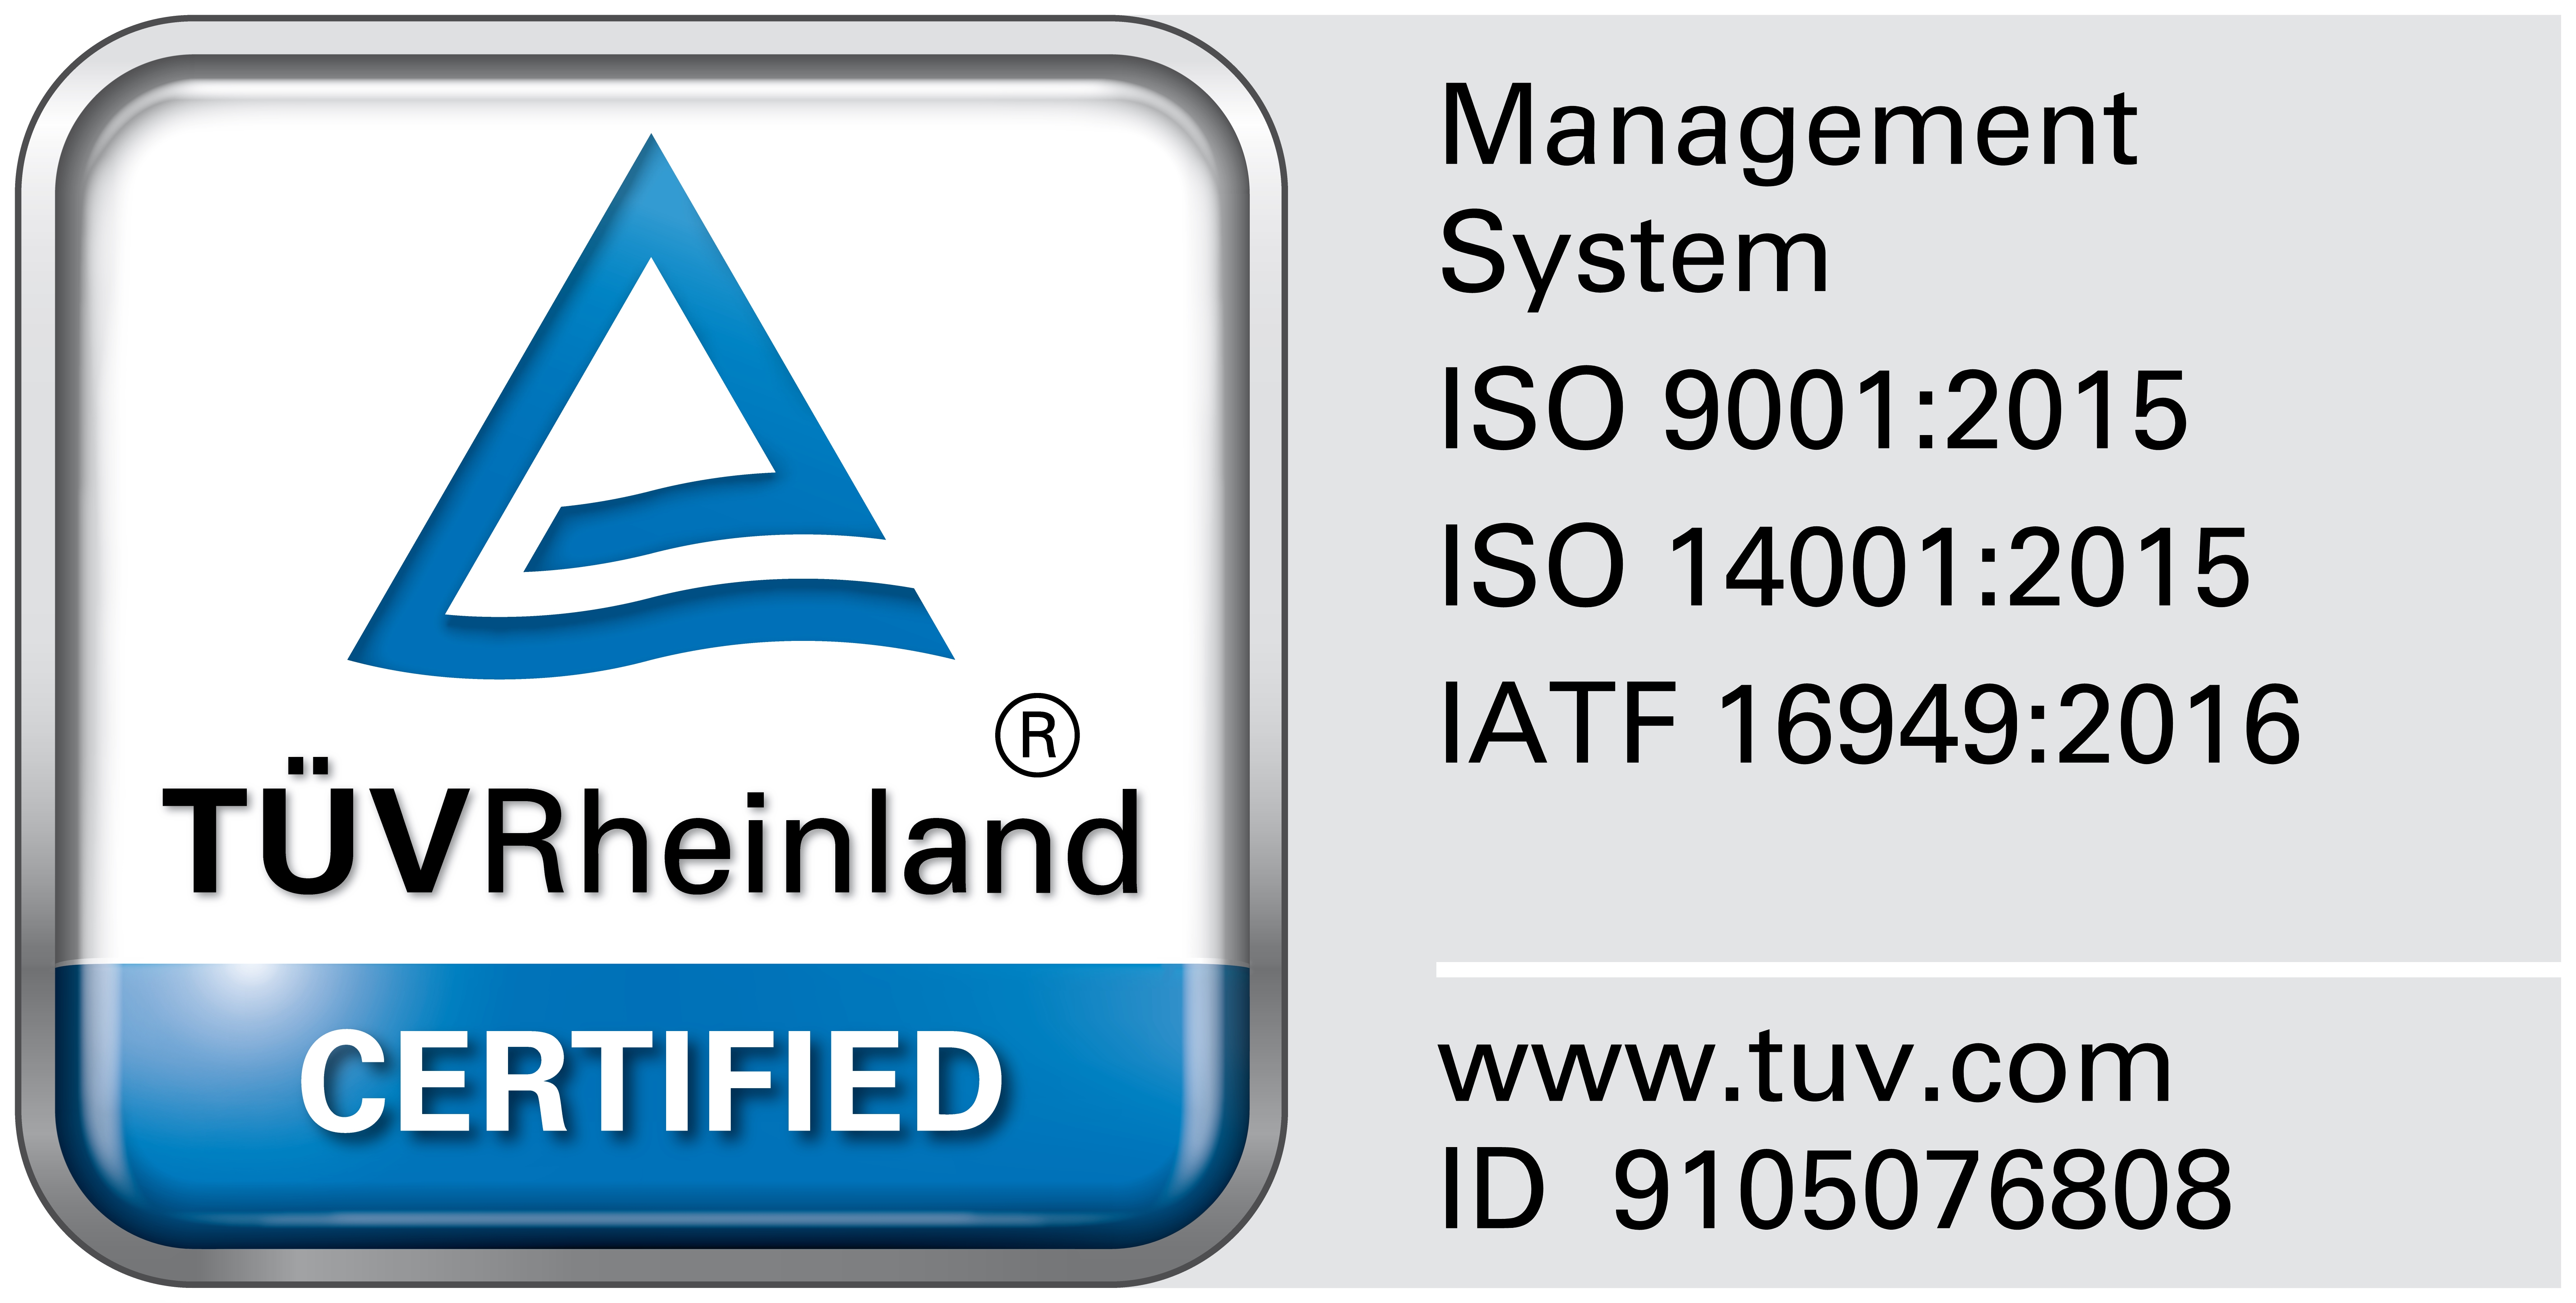 Certified ISO 9001 and ISO 14001